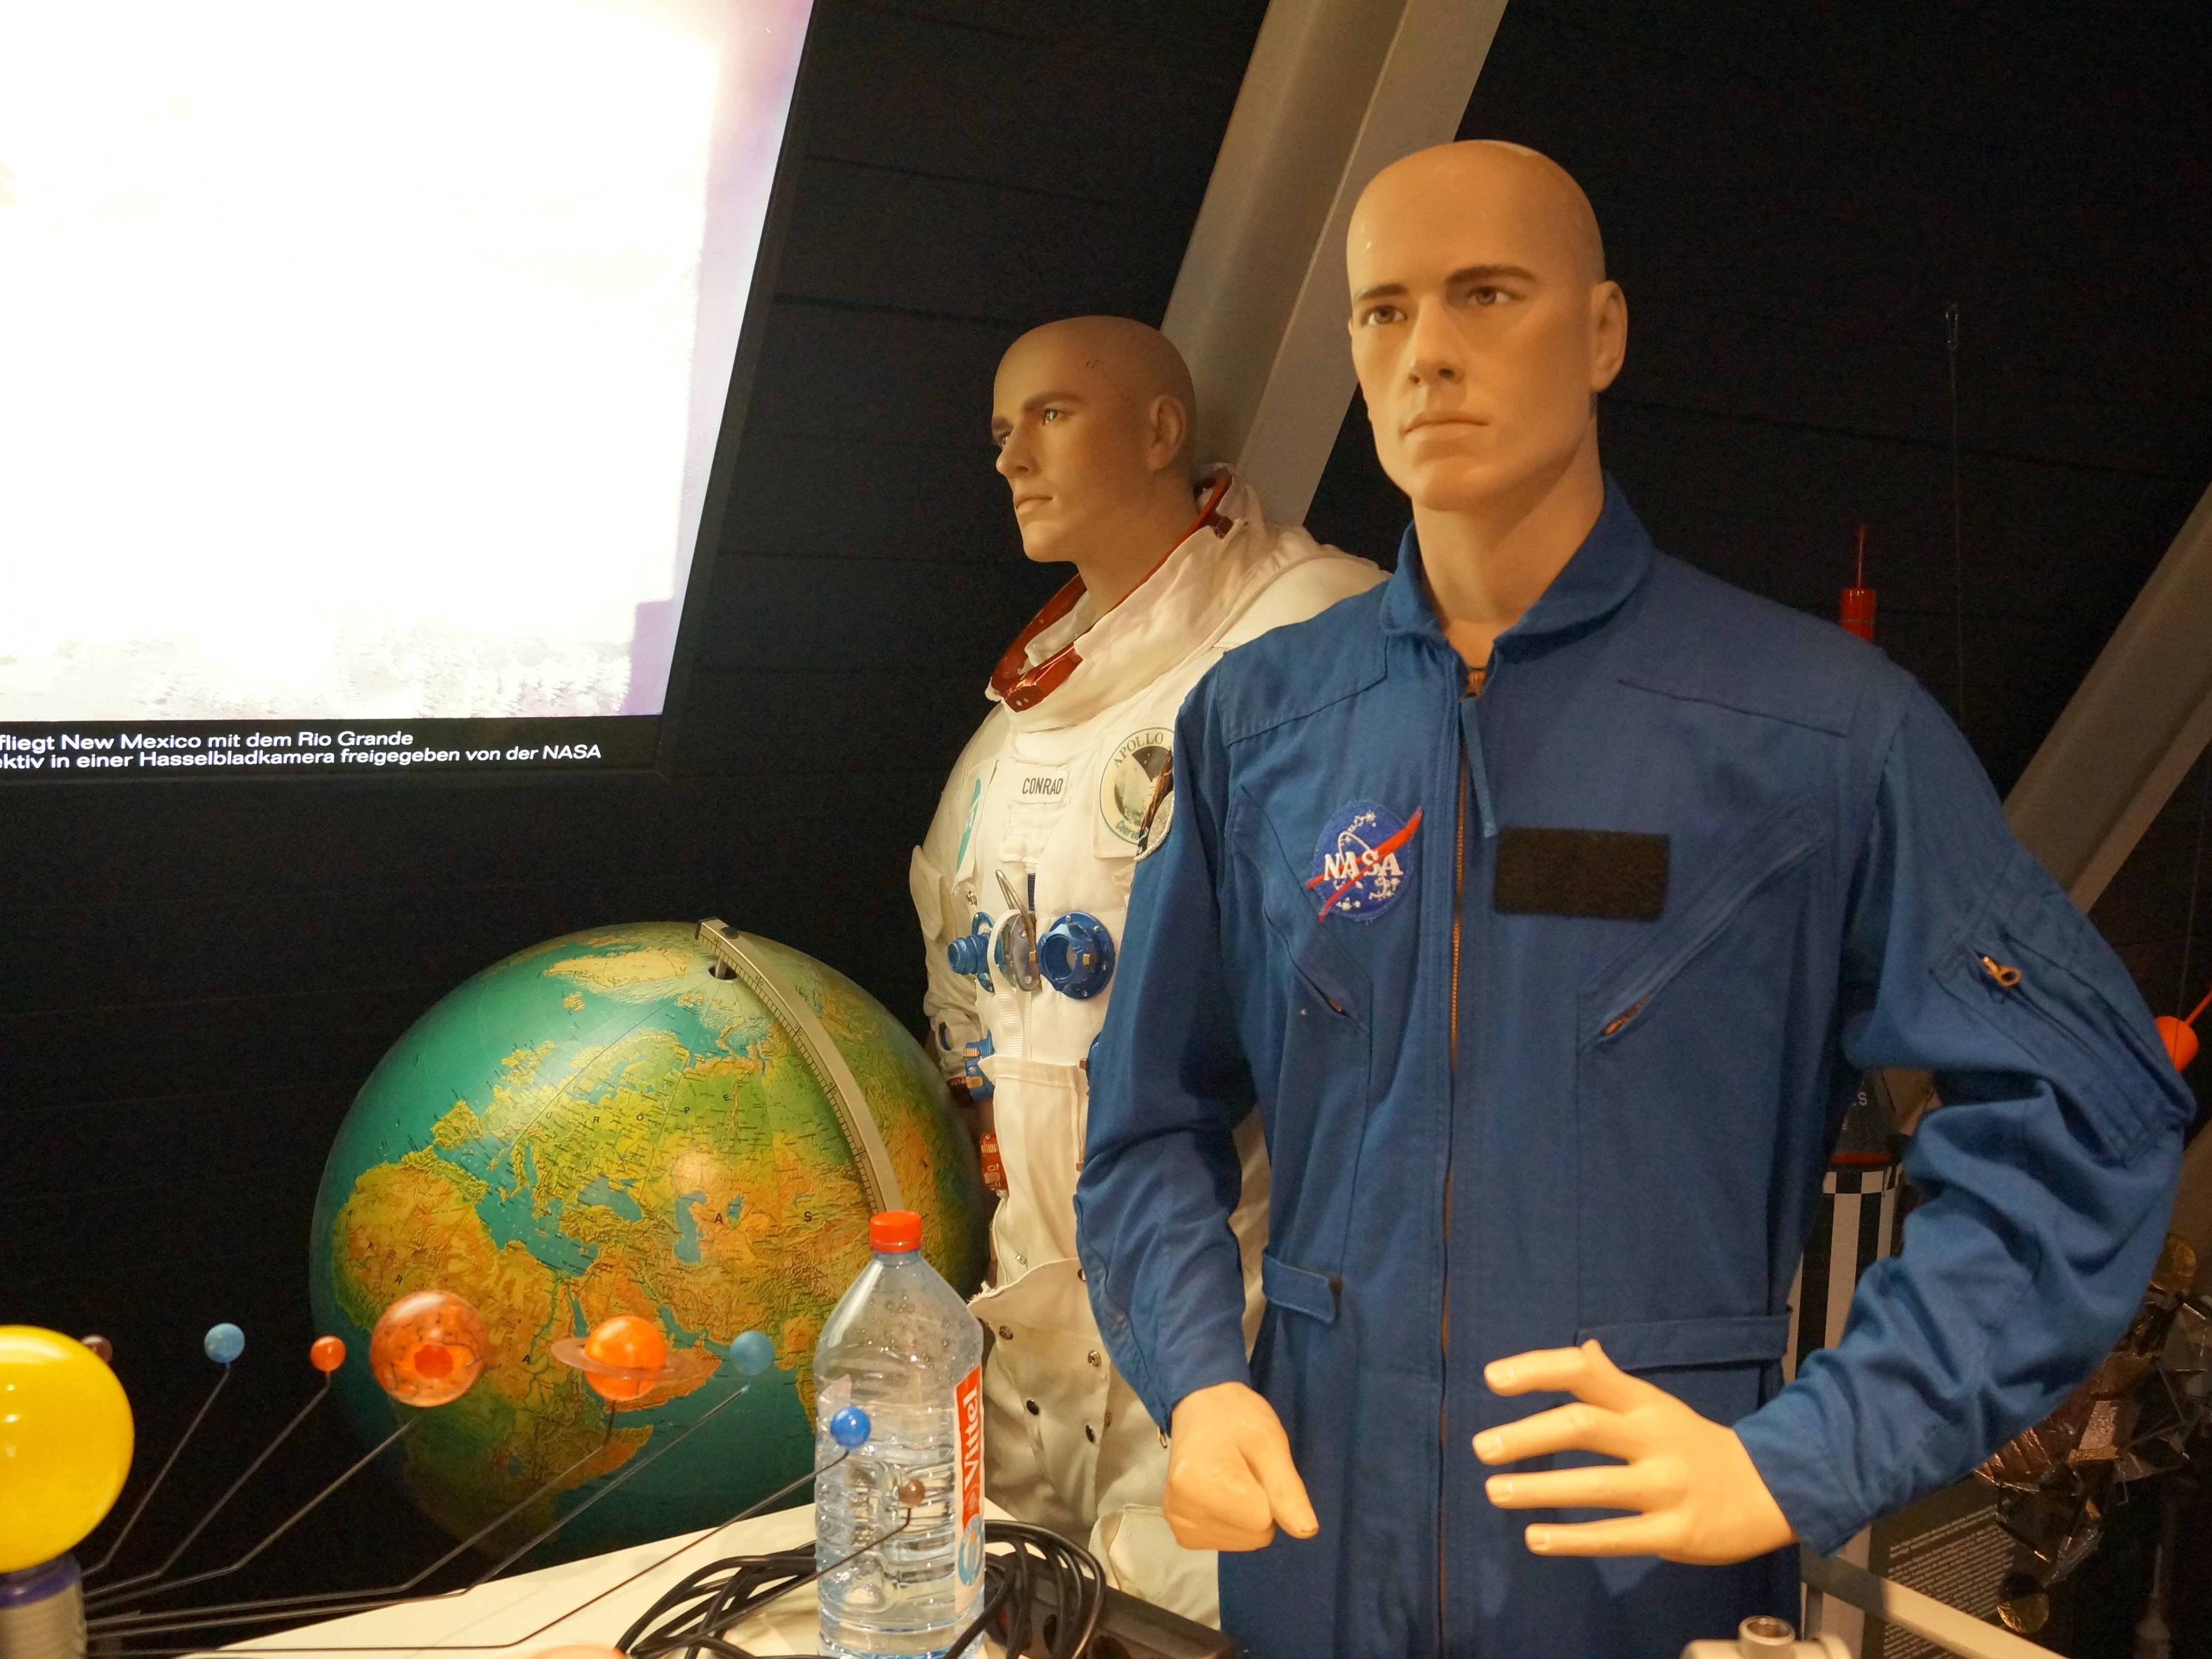 Two space suits from NASA can be seen in the picture